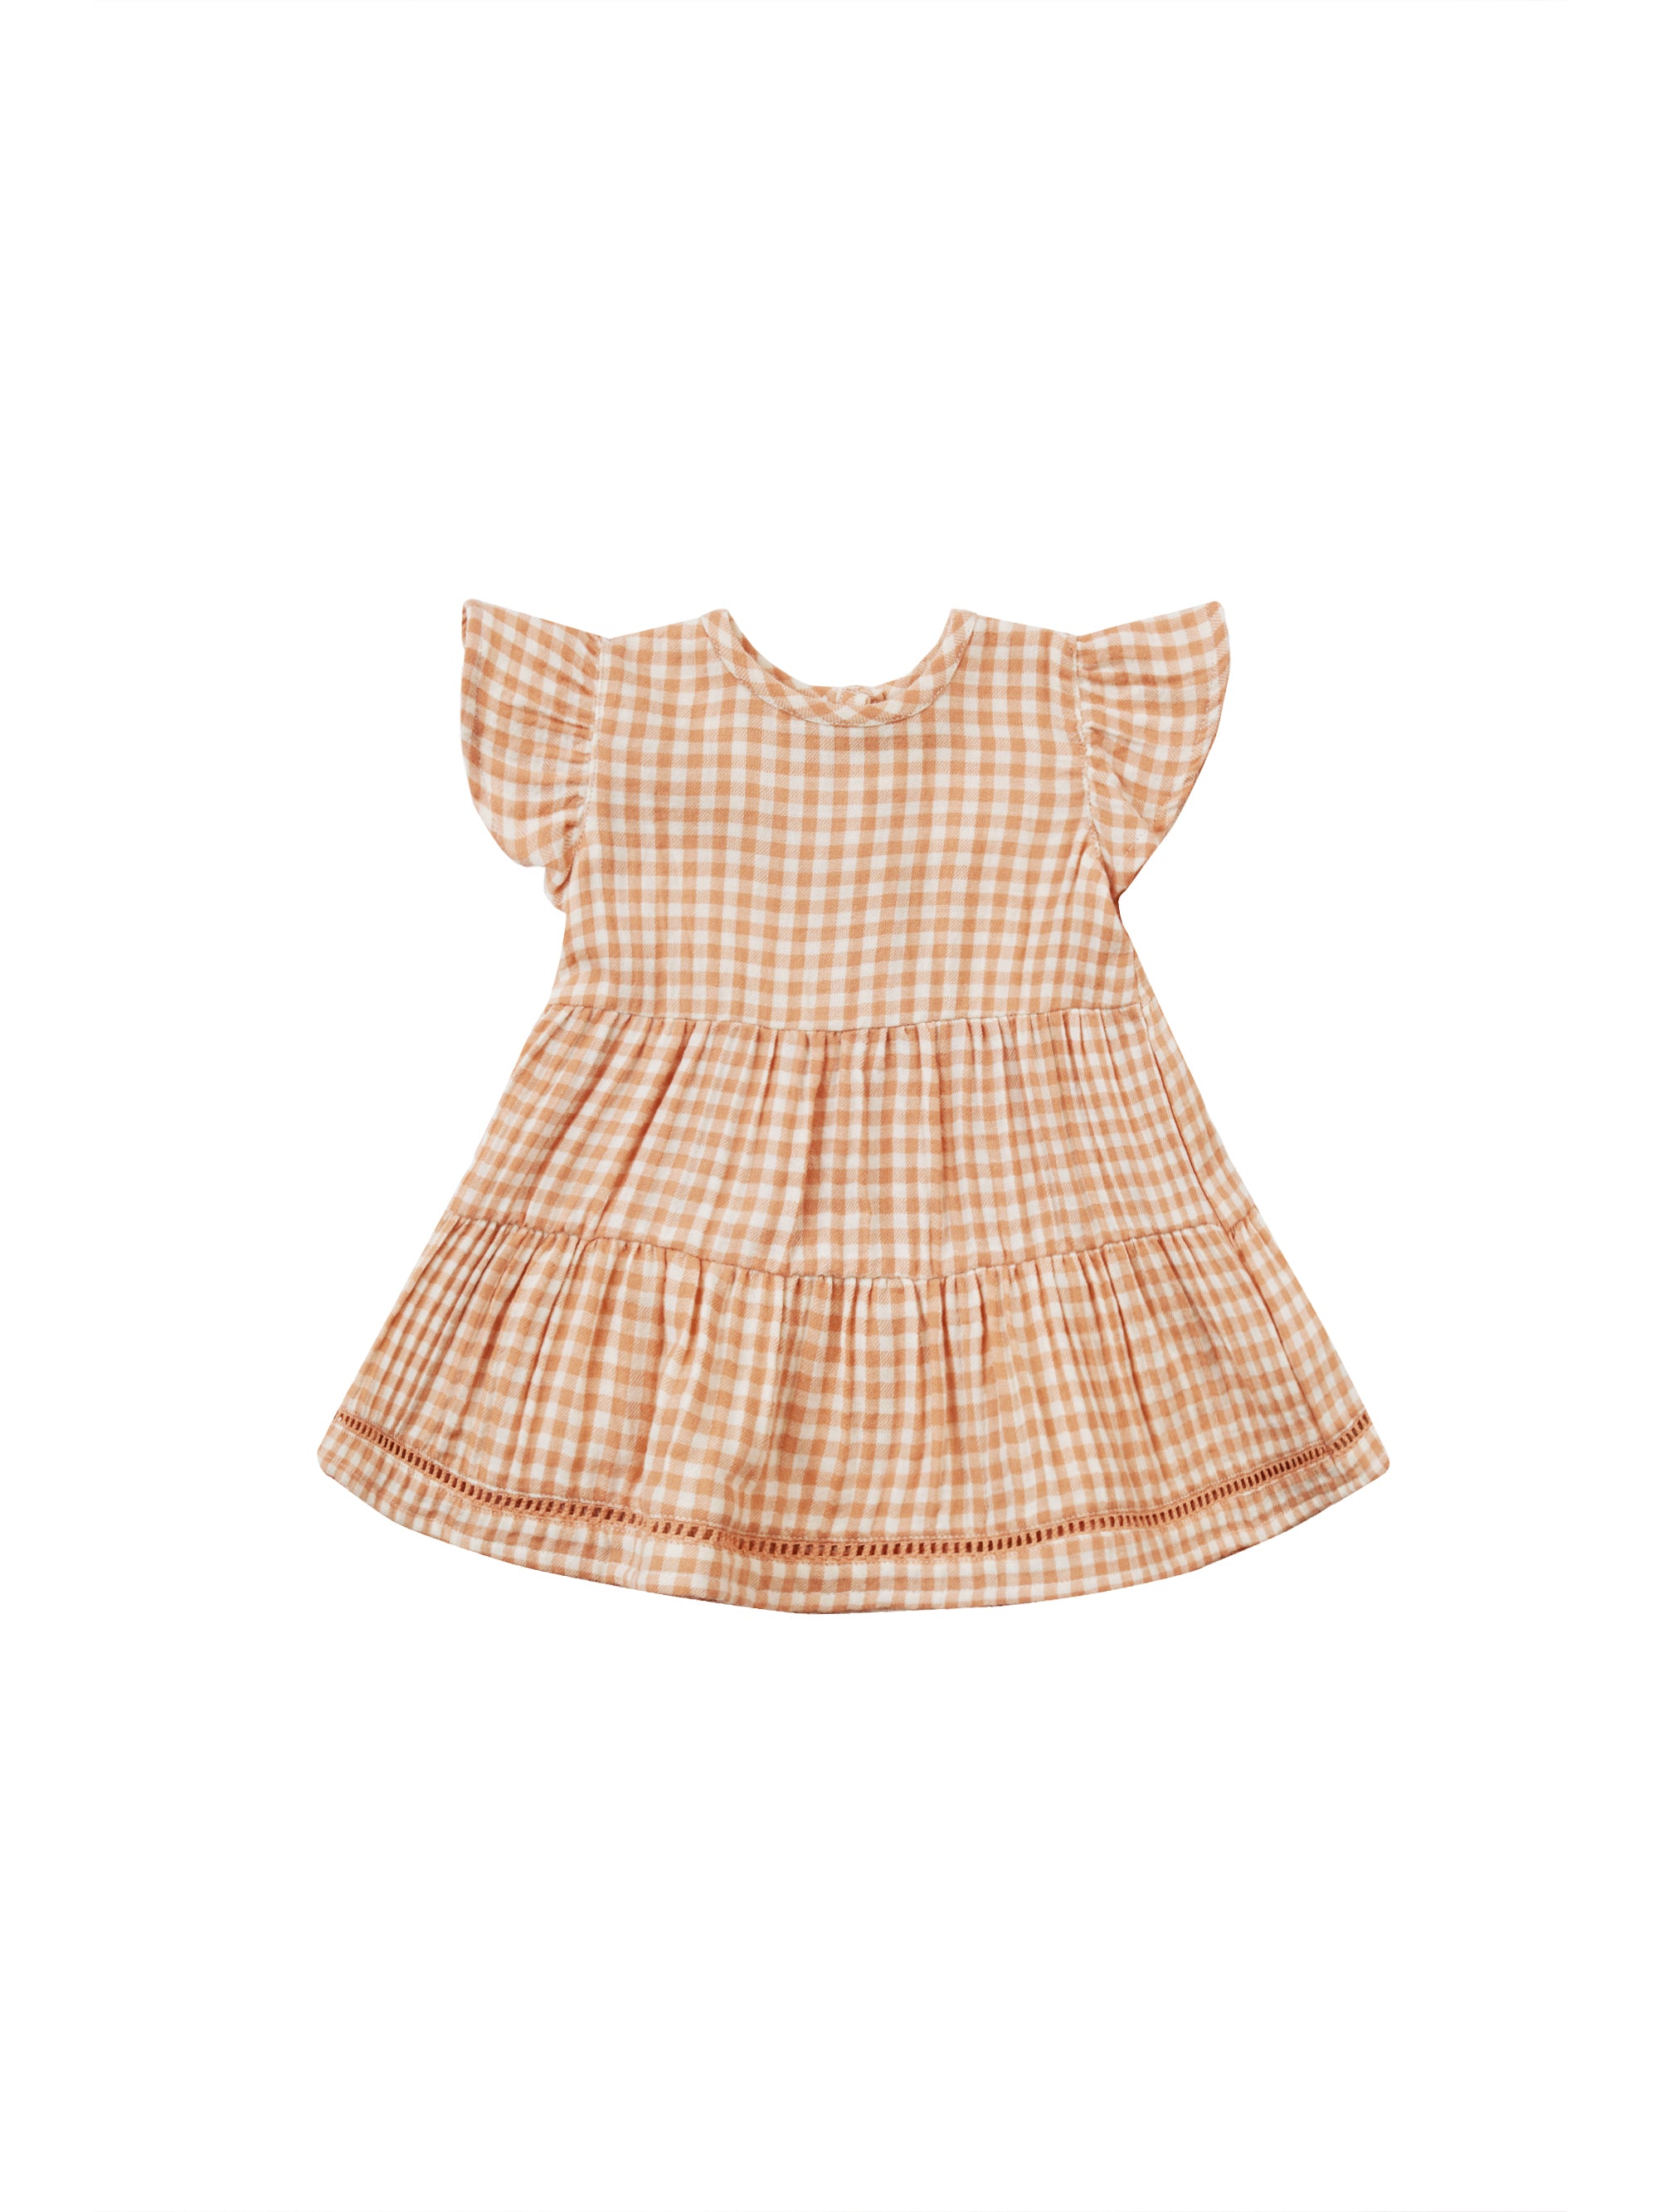 Quincy Mae Lily Dress | Melon Gingham